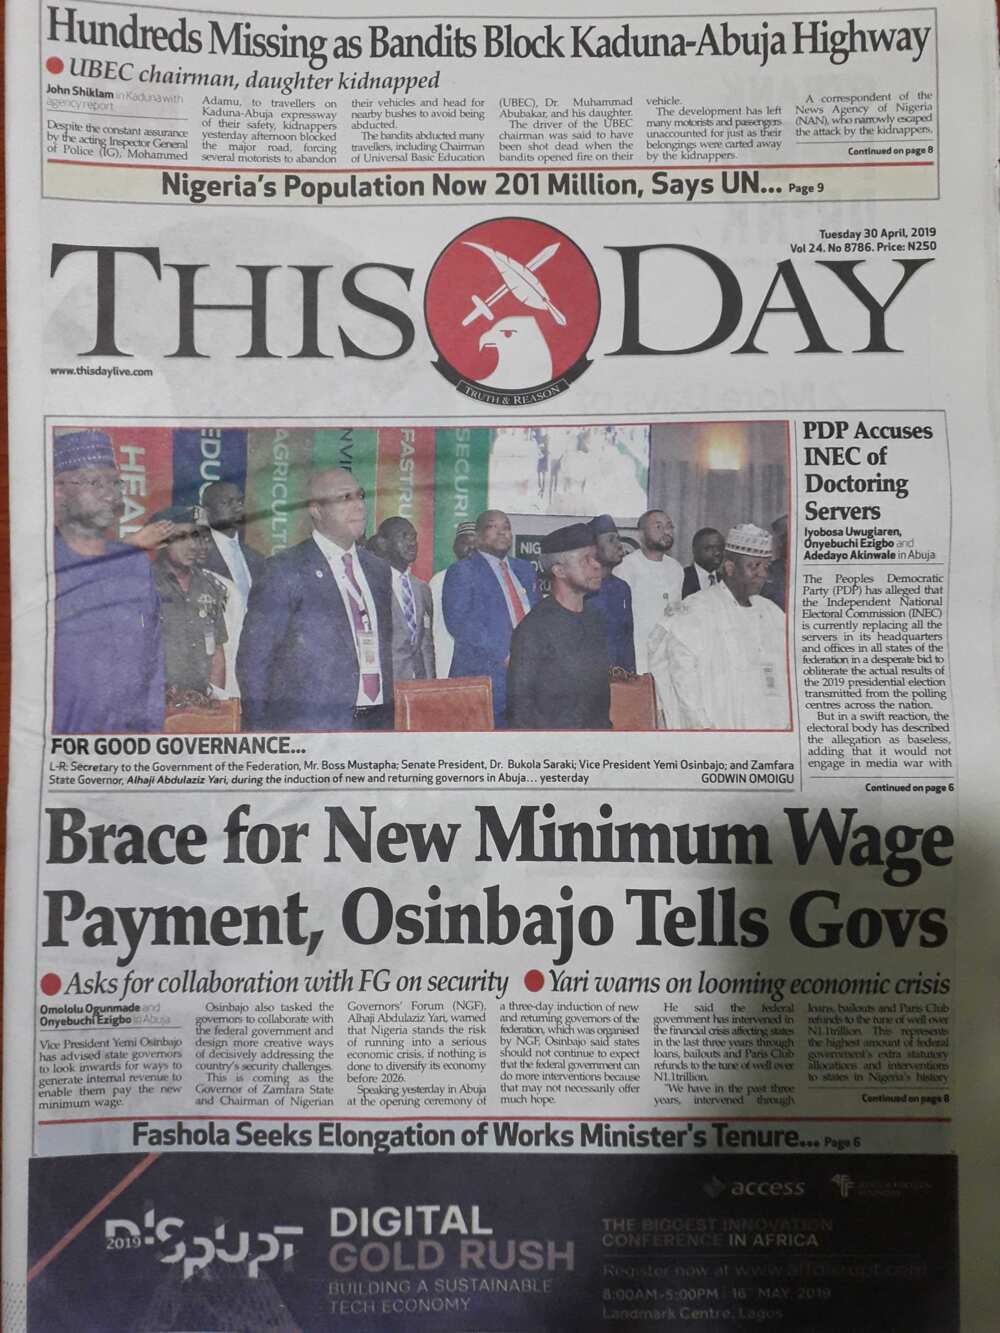 Nigerian newspaper review for April 30: Brace for new minimum wage payment - Osinbajo tells governors